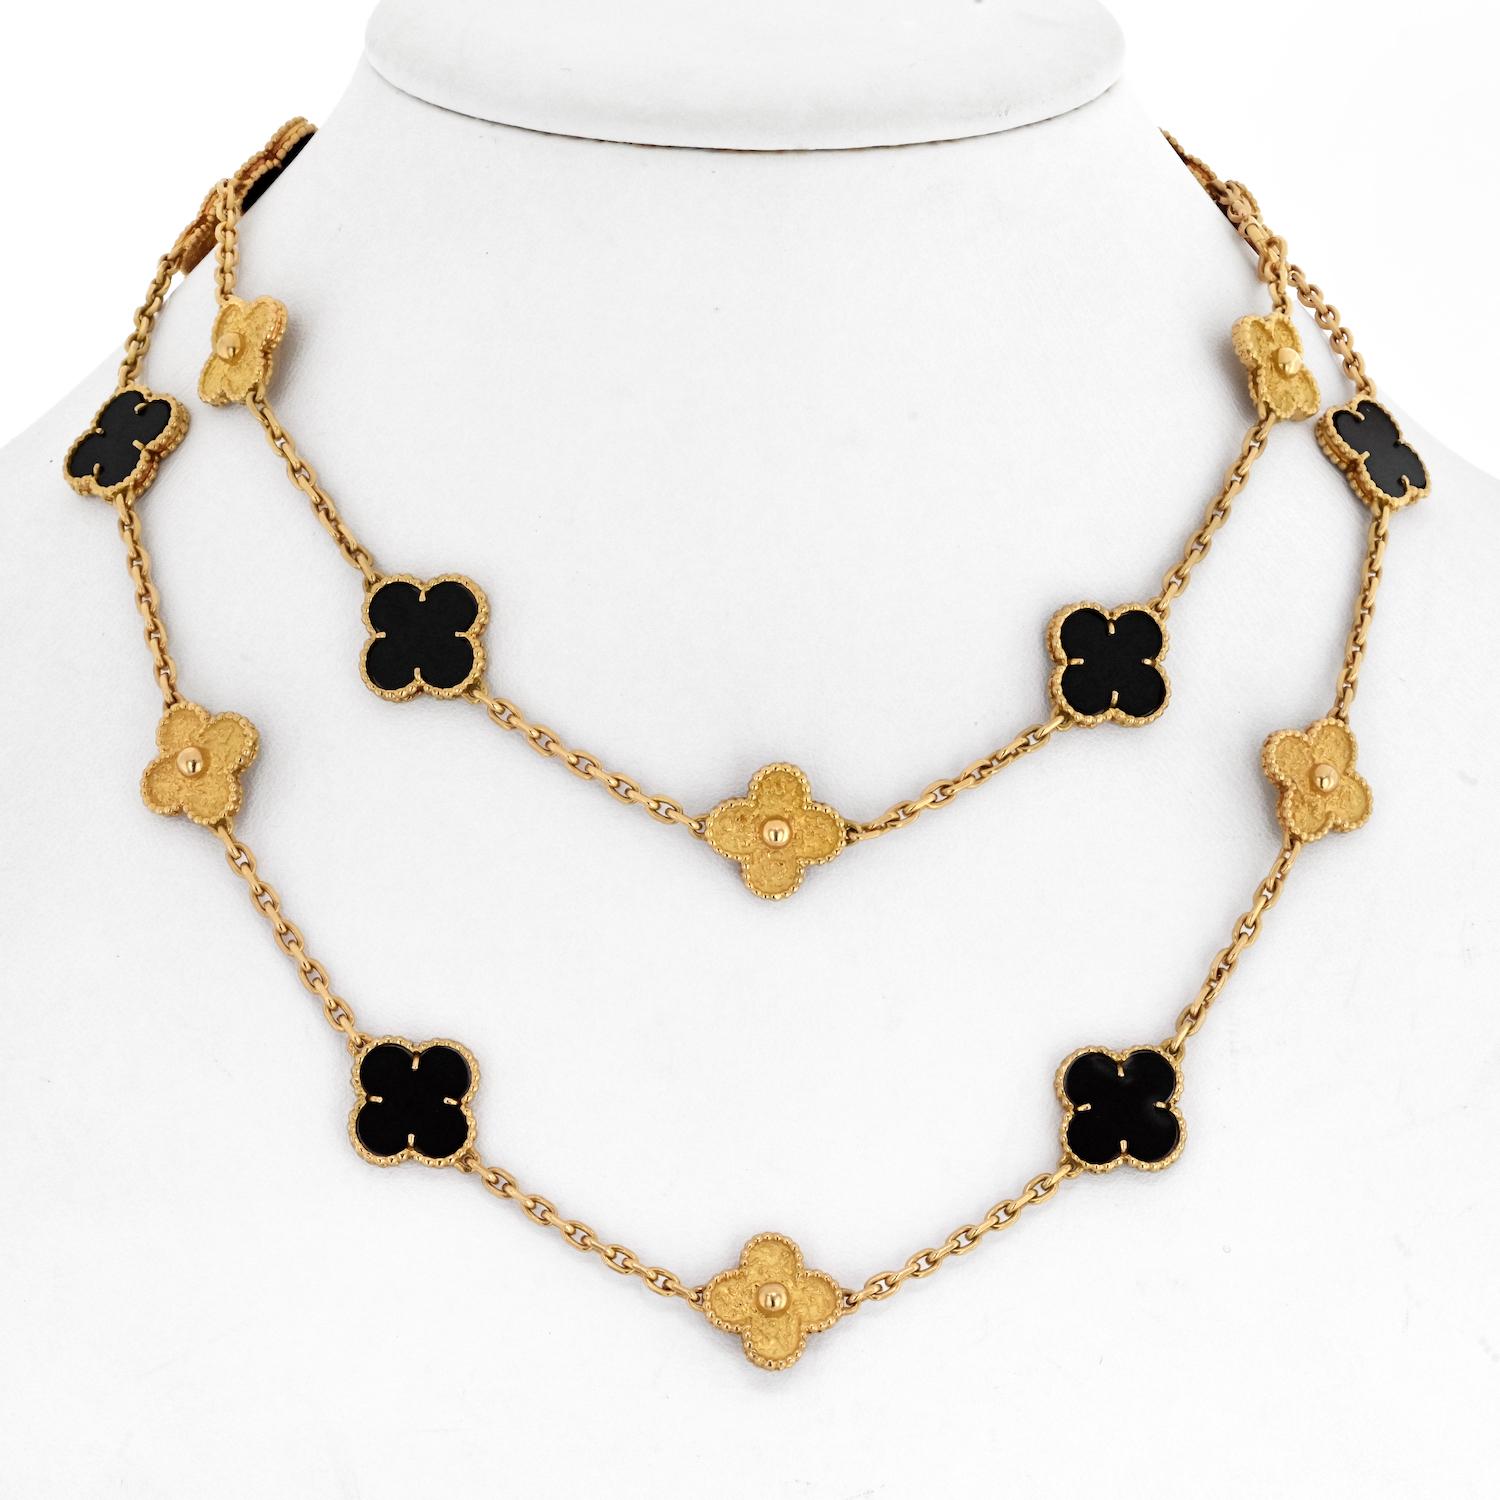 The Van Cleef & Arpels Alhambra collection is one of the most coveted fine jewelry collections in the world. Each piece from the collection embodies the spirit of timelessness and good luck.

20 motif alternating yellow gold and onyx clover